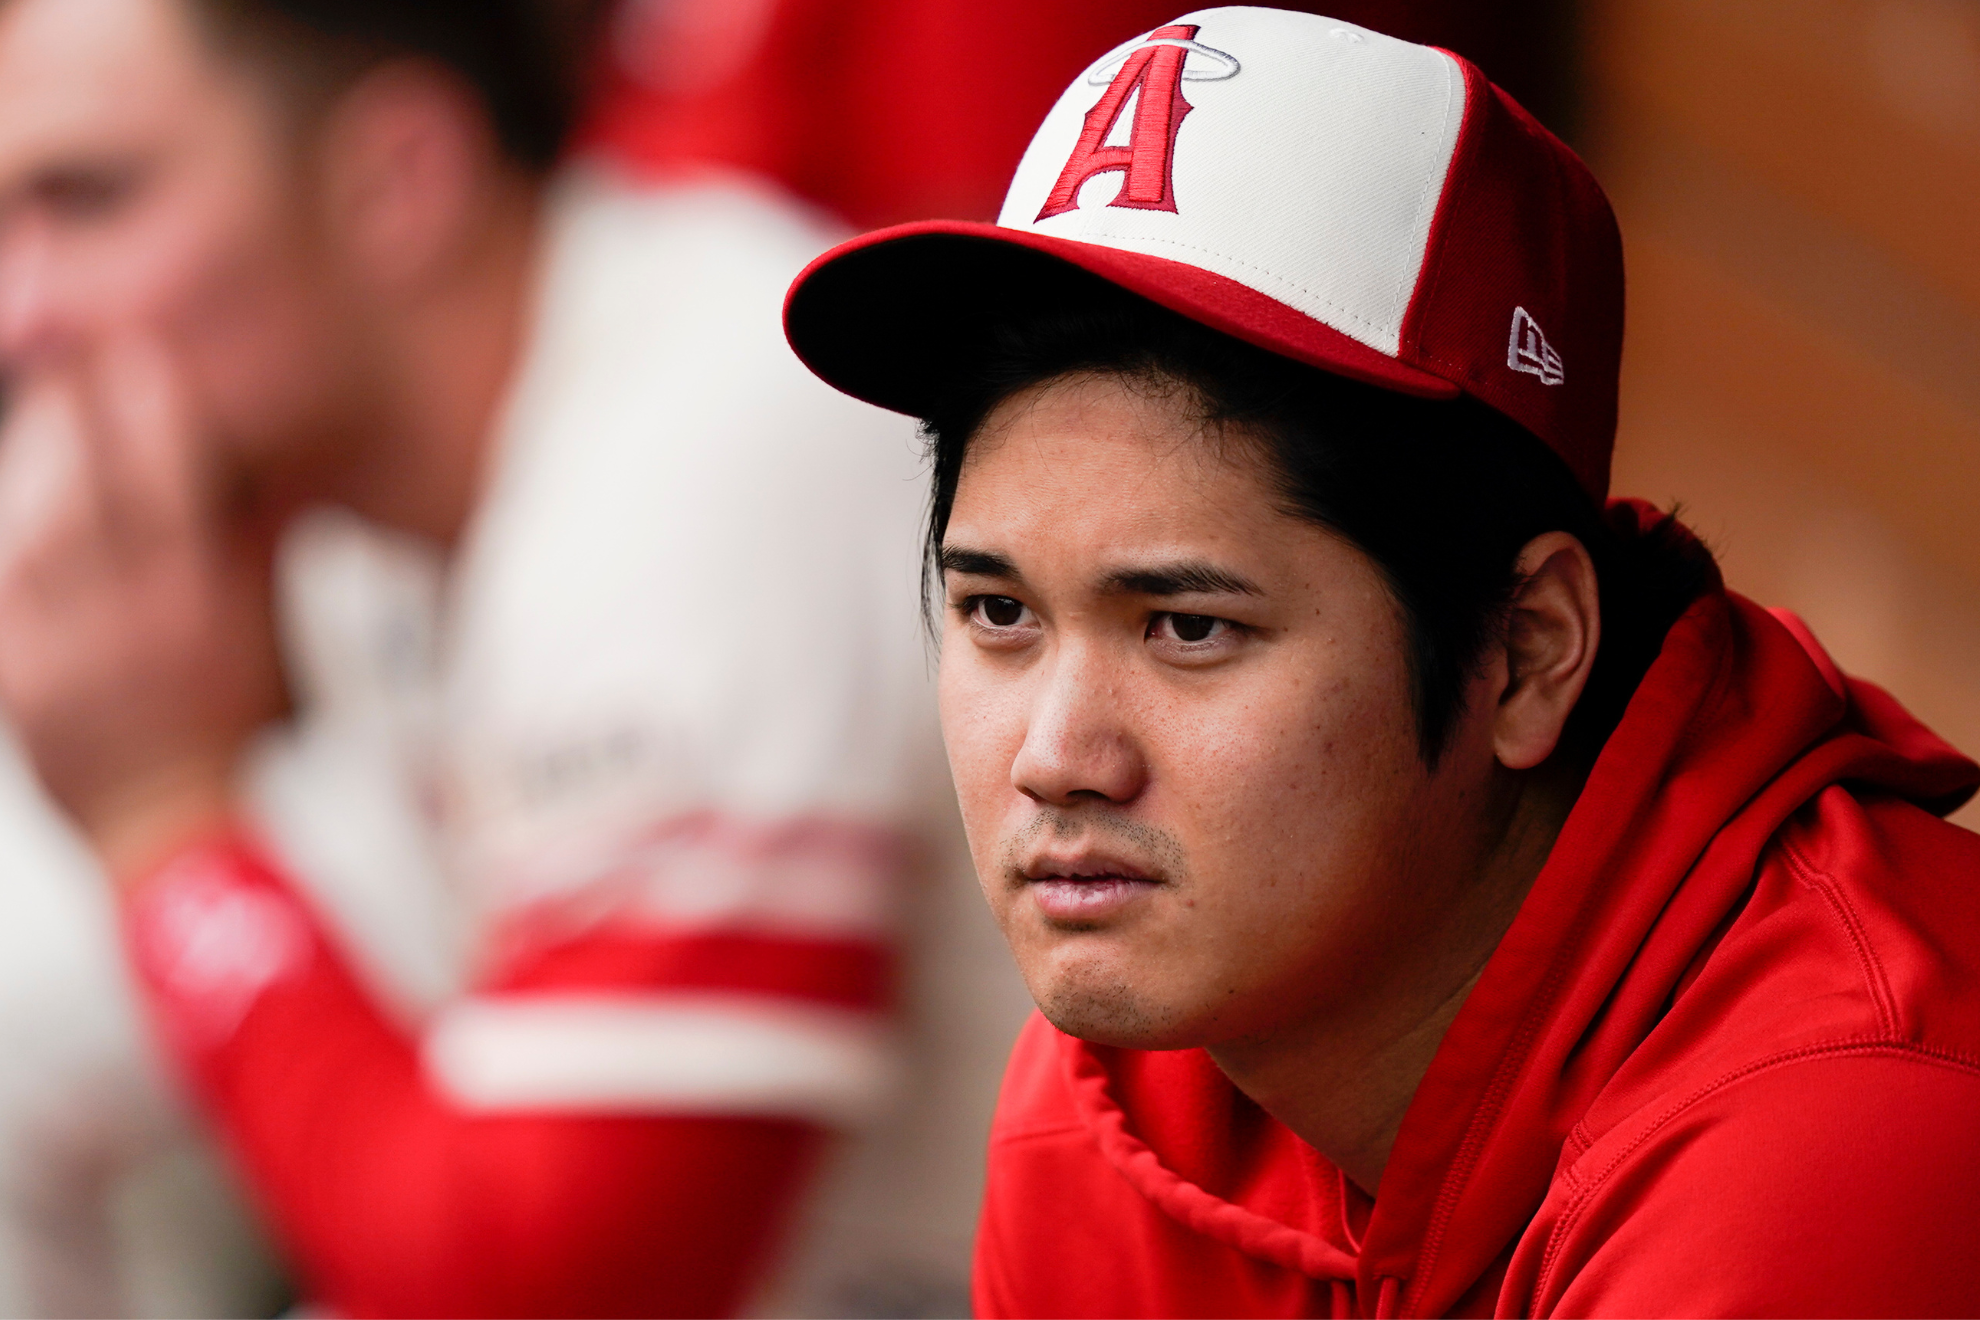 Ohtani is a two-time AL MVP, but in which league does his future lie?